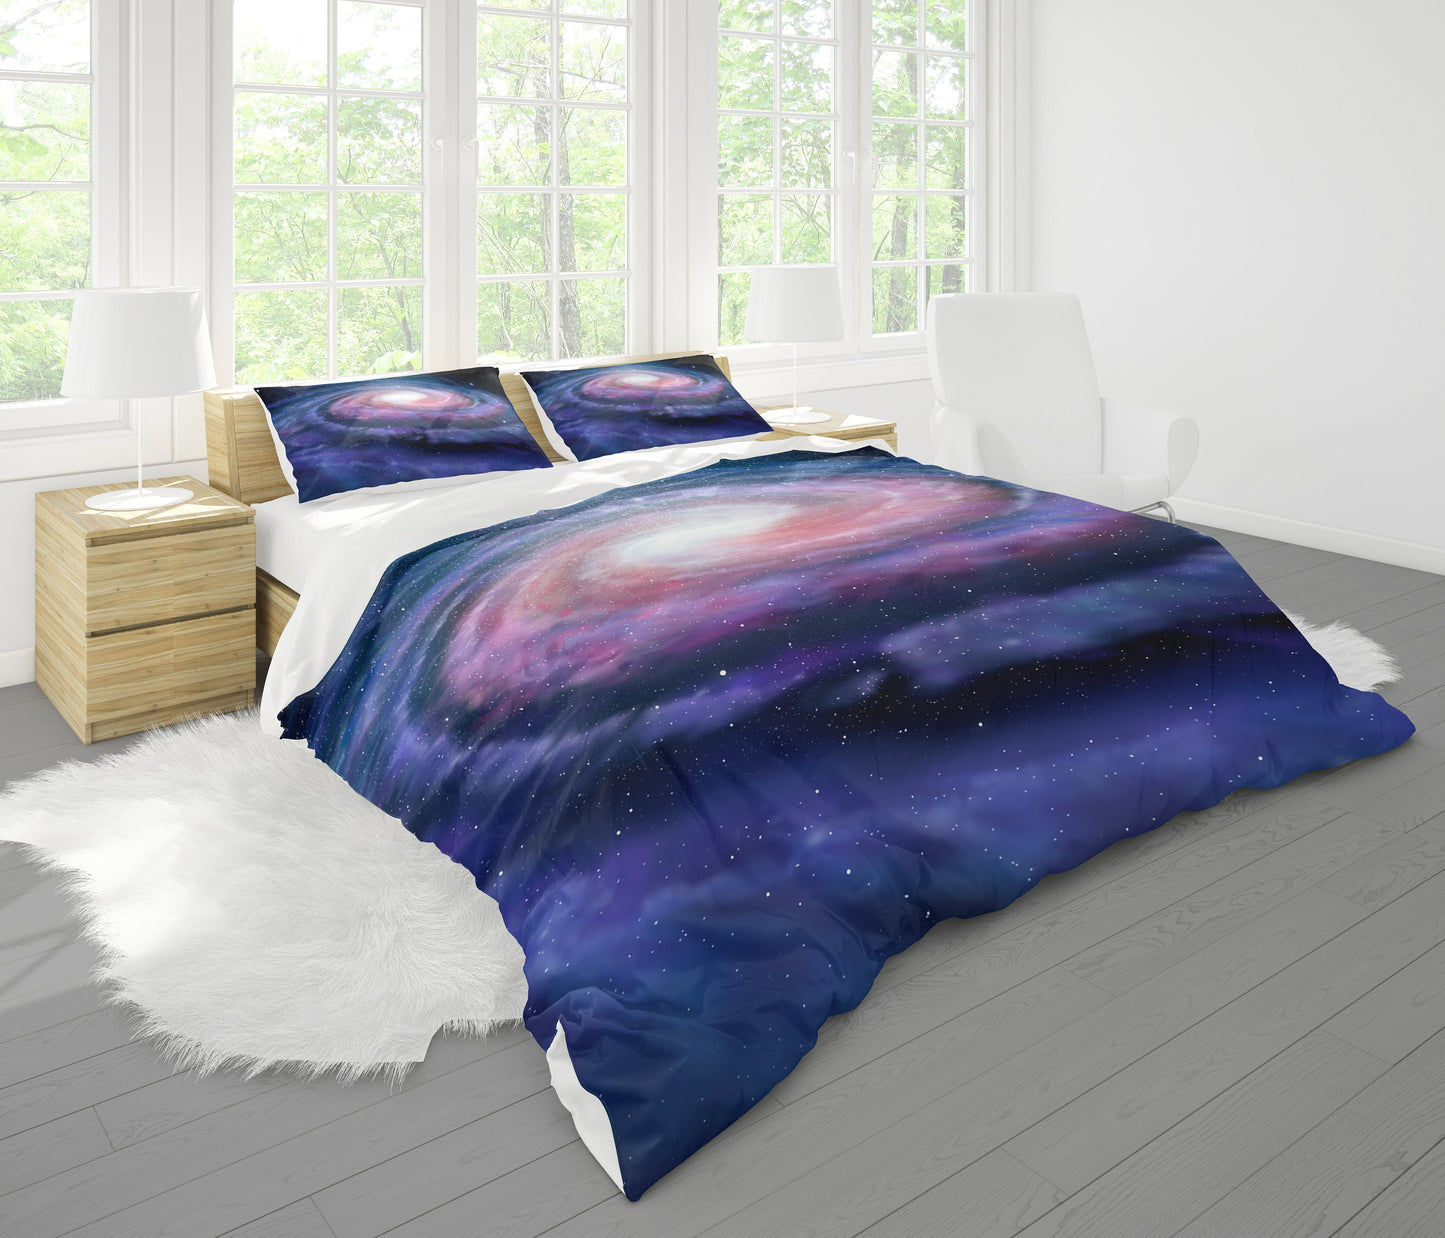 Milky Way Space Duvet Cover or Comforter purple bedding space bedding kids comforter children bedding boys or girl galaxy comforter galaxies